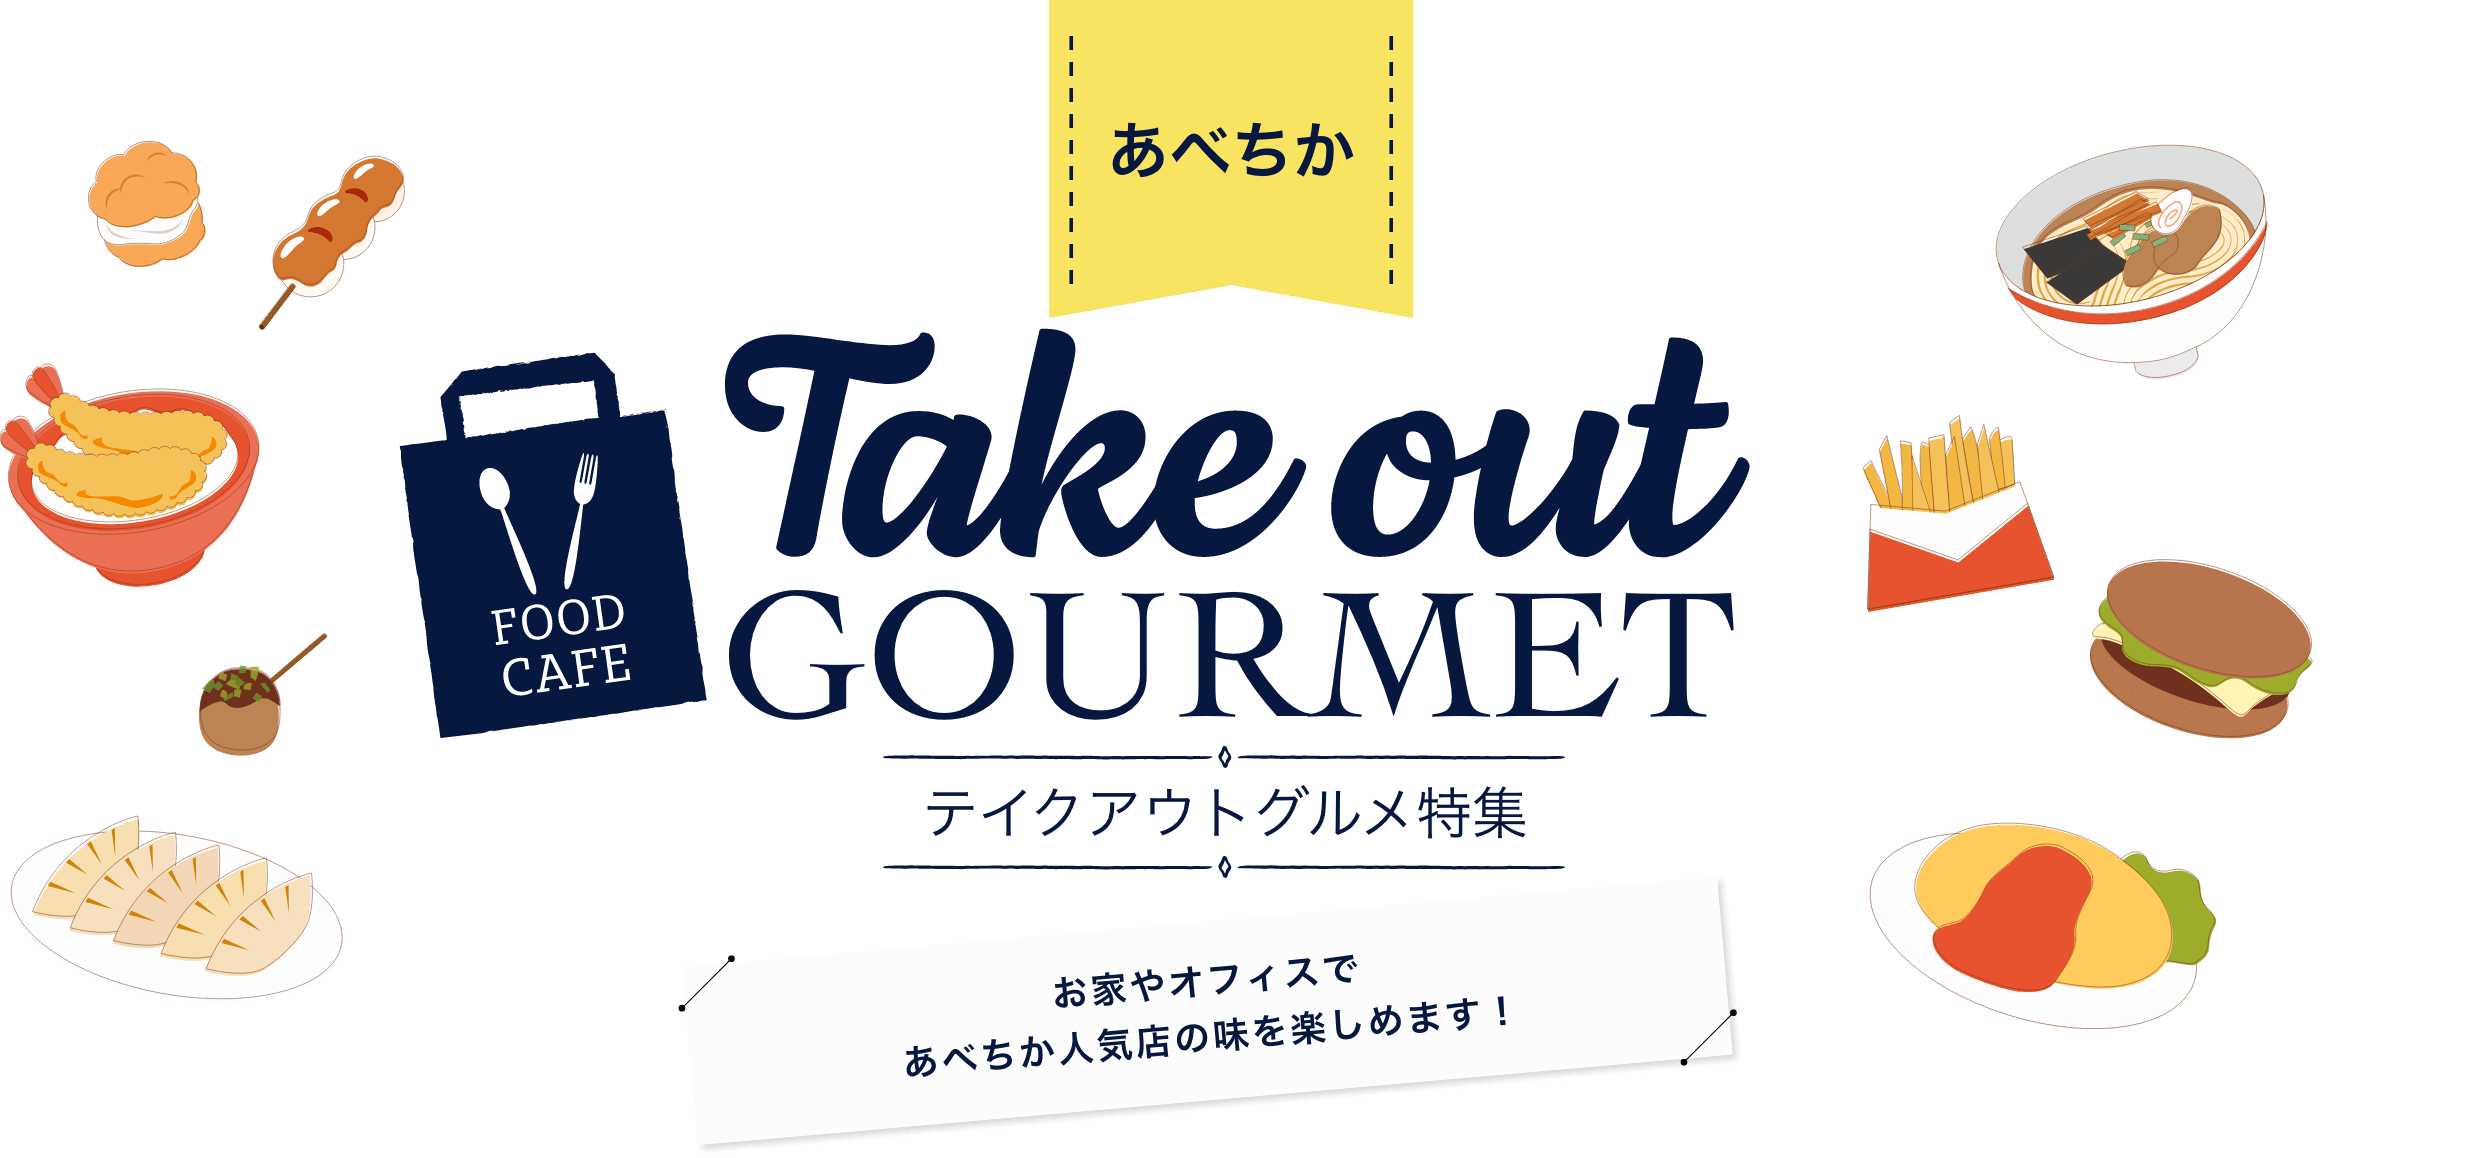 Take-out Gourmet Special Feature You can enjoy the taste of popular AVETICA at your home or office!